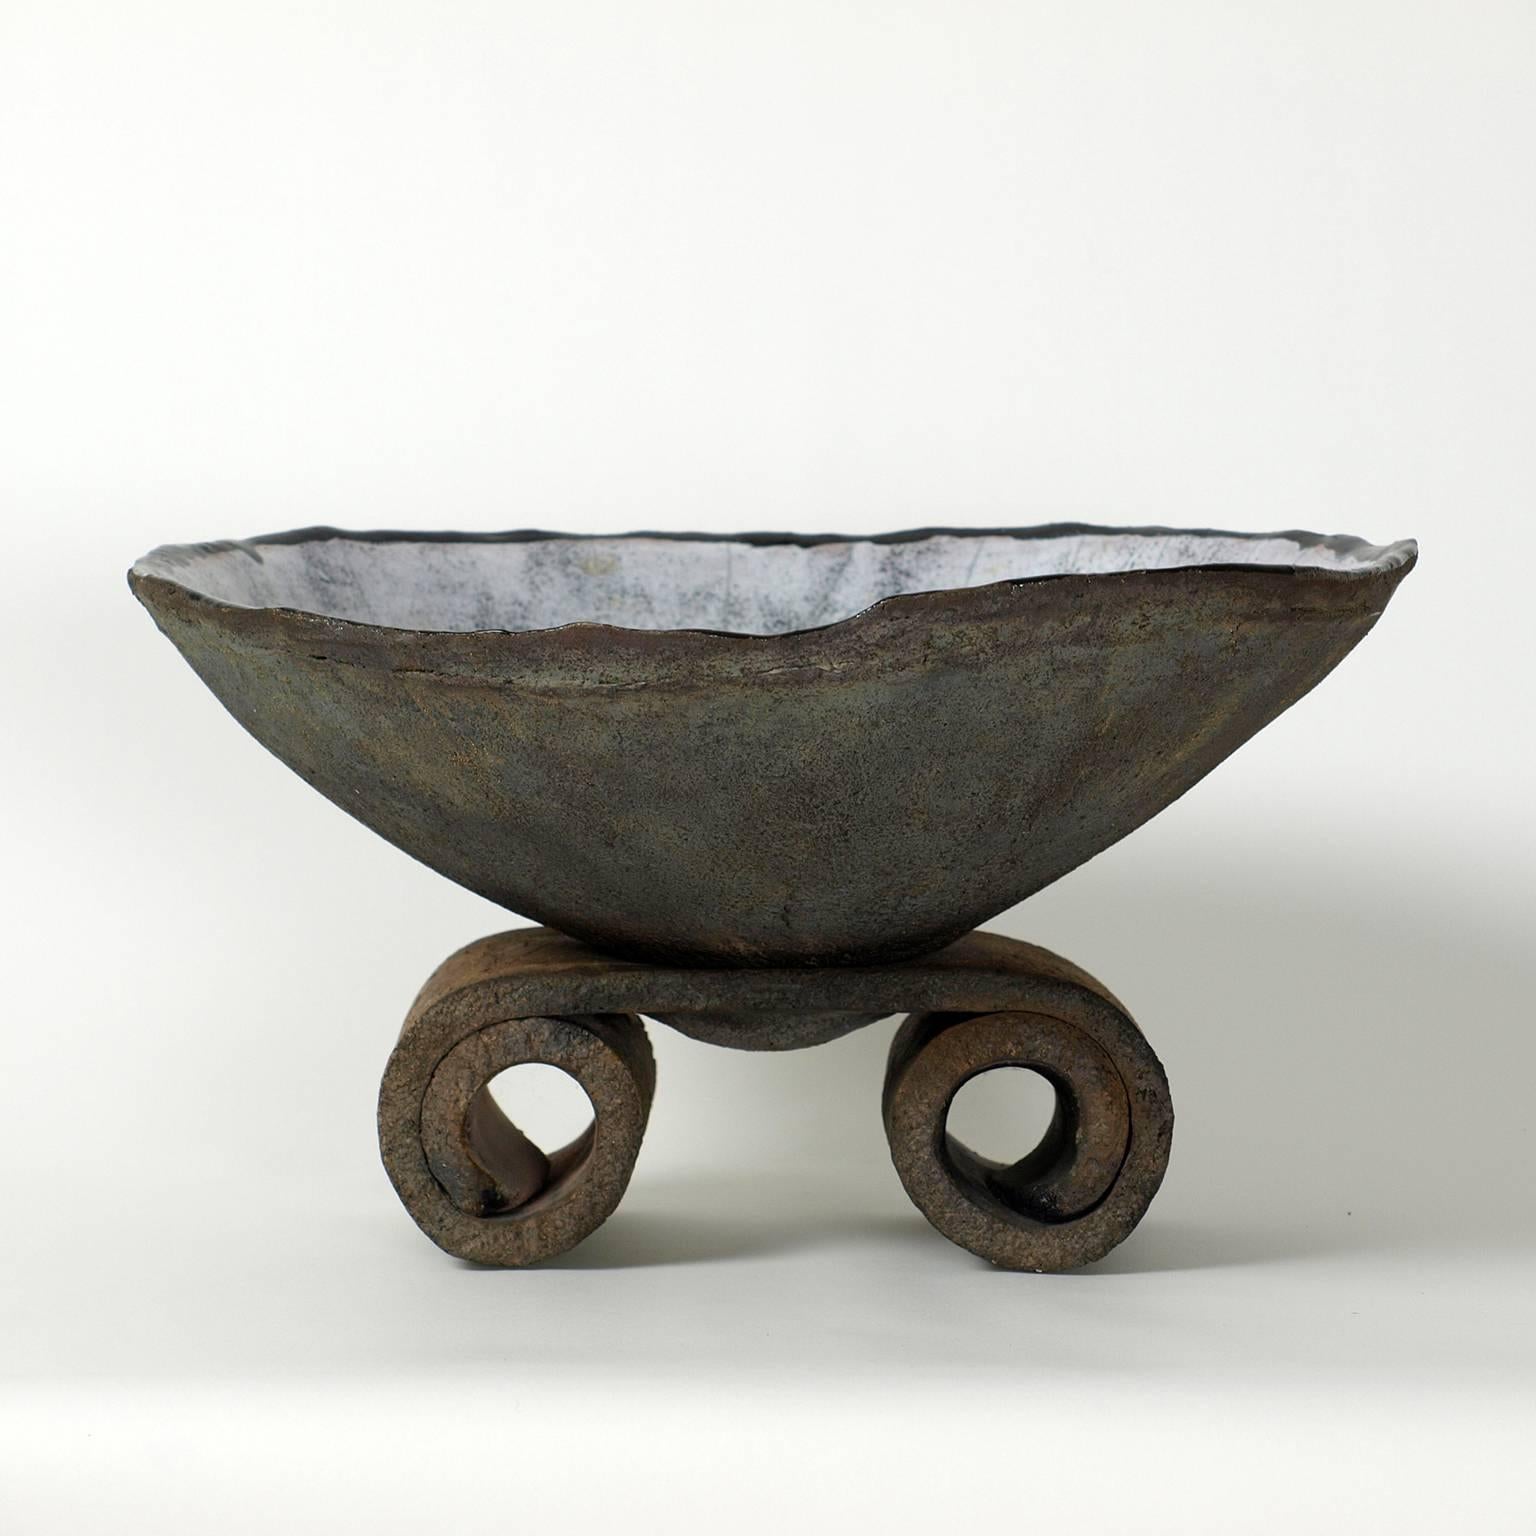 Large raku ceramic bowl on pedestal by Gisele Buthod-Garc¸on.
Light gray craqueled glaze inside the bowl with a little gold glaze in the bottom.
Rare and unique beautiful peace.